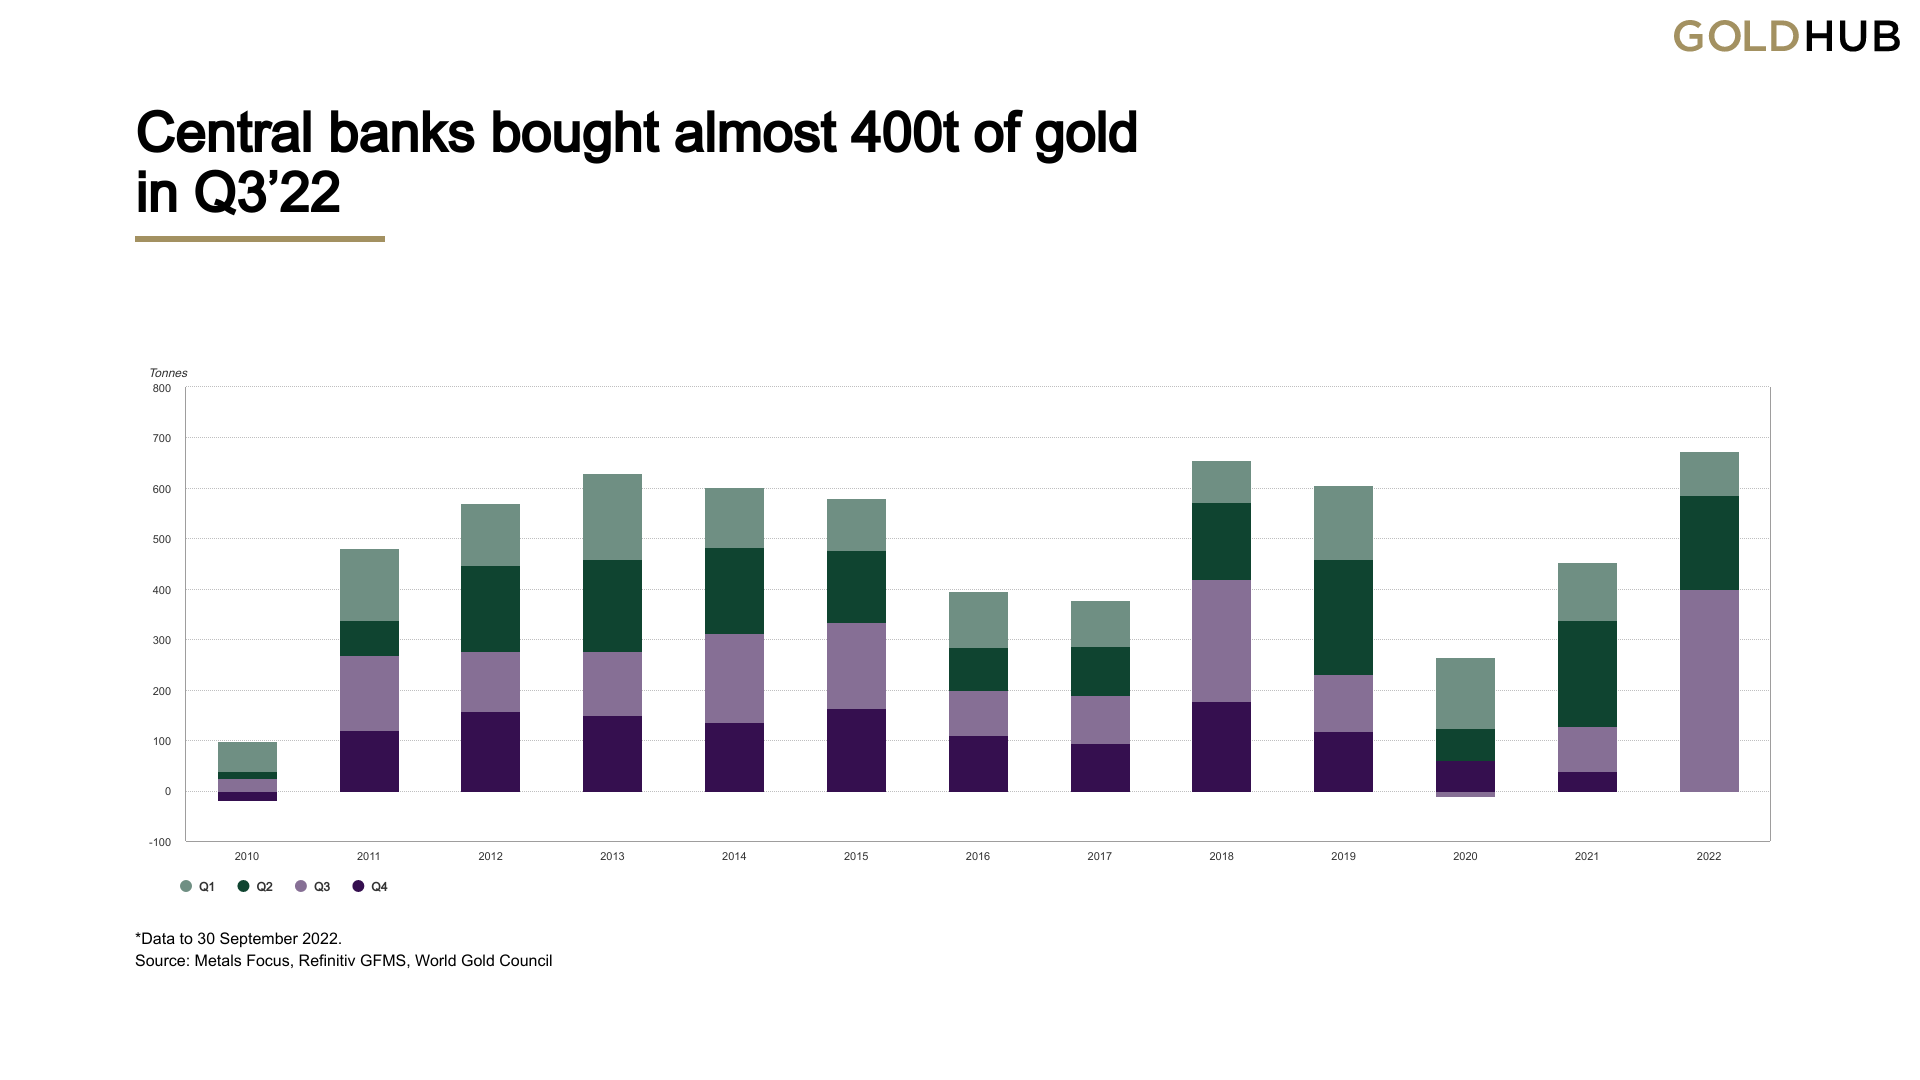 Central Bank Gold Buys This Year Reach an All-Time Quarterly High in Q3, 400 Tons Purchased Is the 'Most on Record